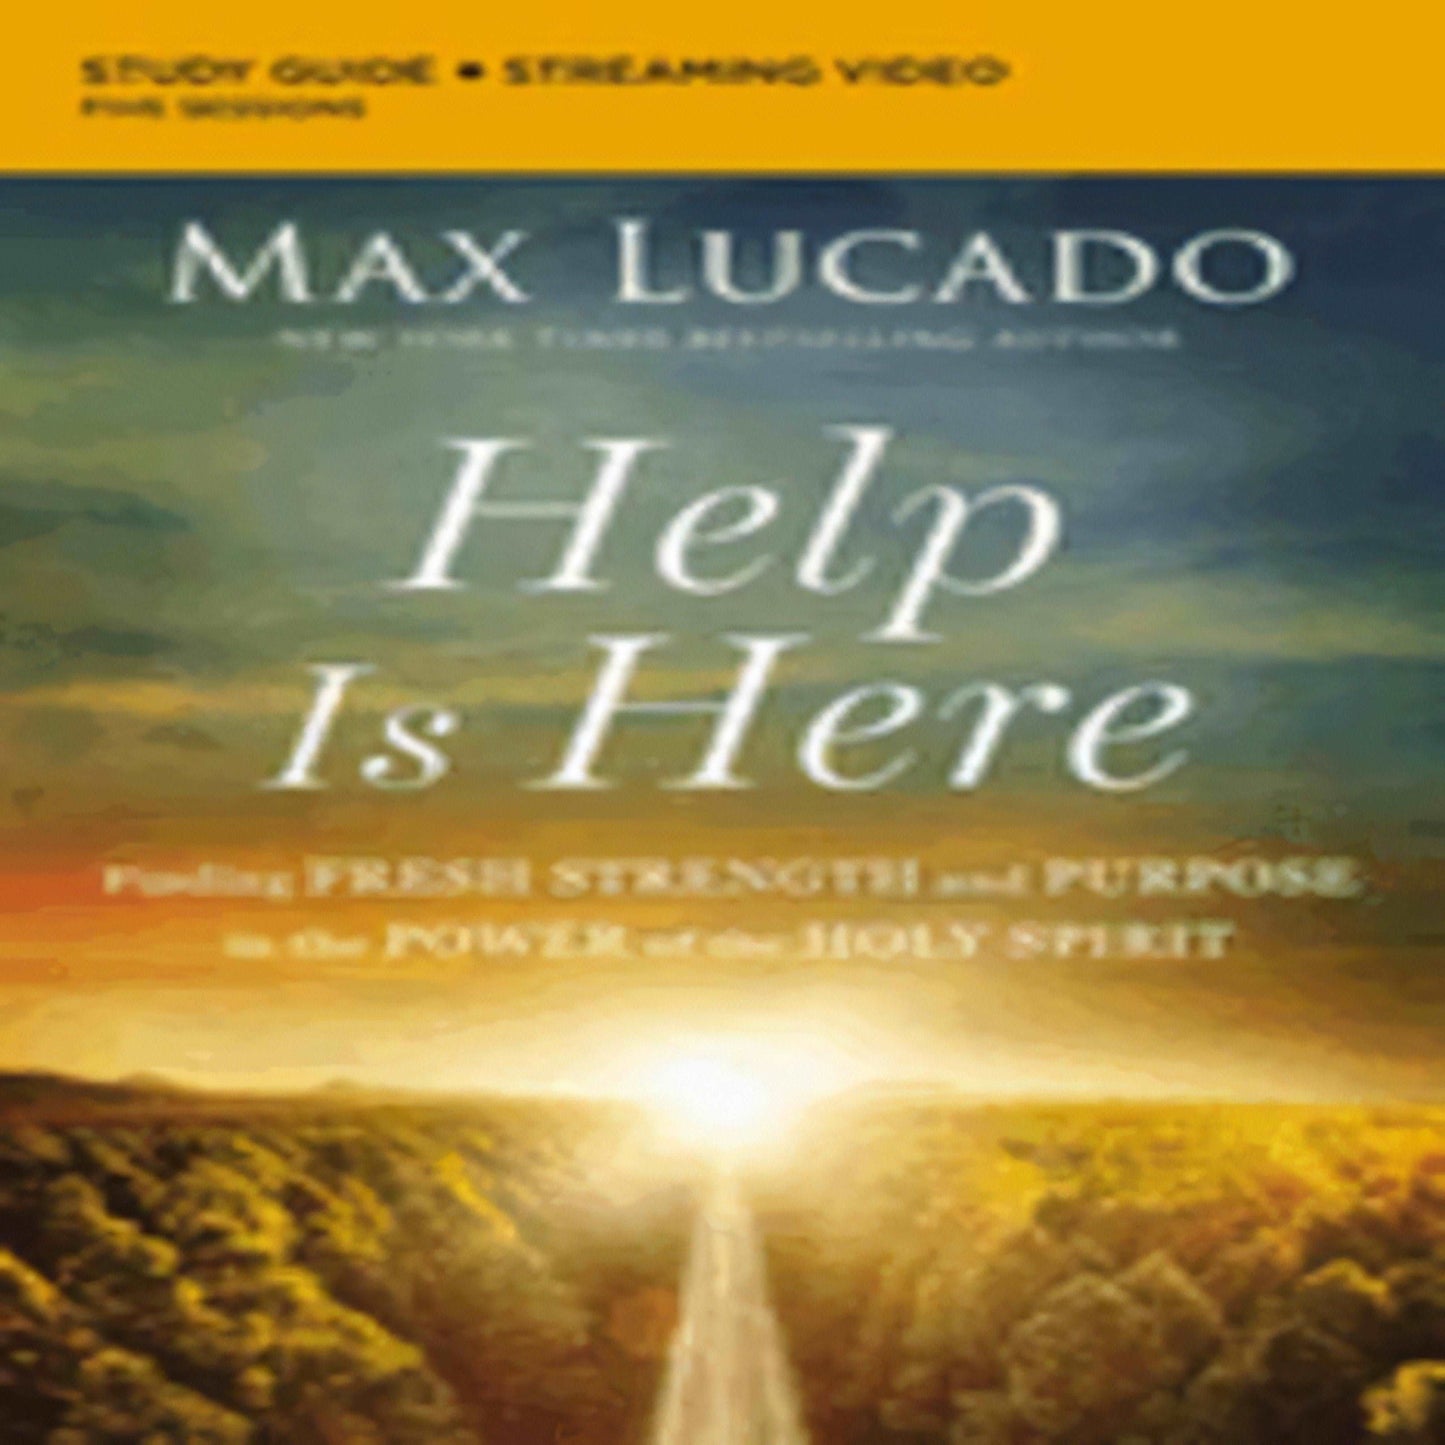 Help Is Here Bible Study Guide Plus Streaming Video: Finding Fresh Strength and Purpose in the Power of the Holy Spirit260-032023-0310133068DPGBOOKSTORE.COM. Today's Bestsellers.